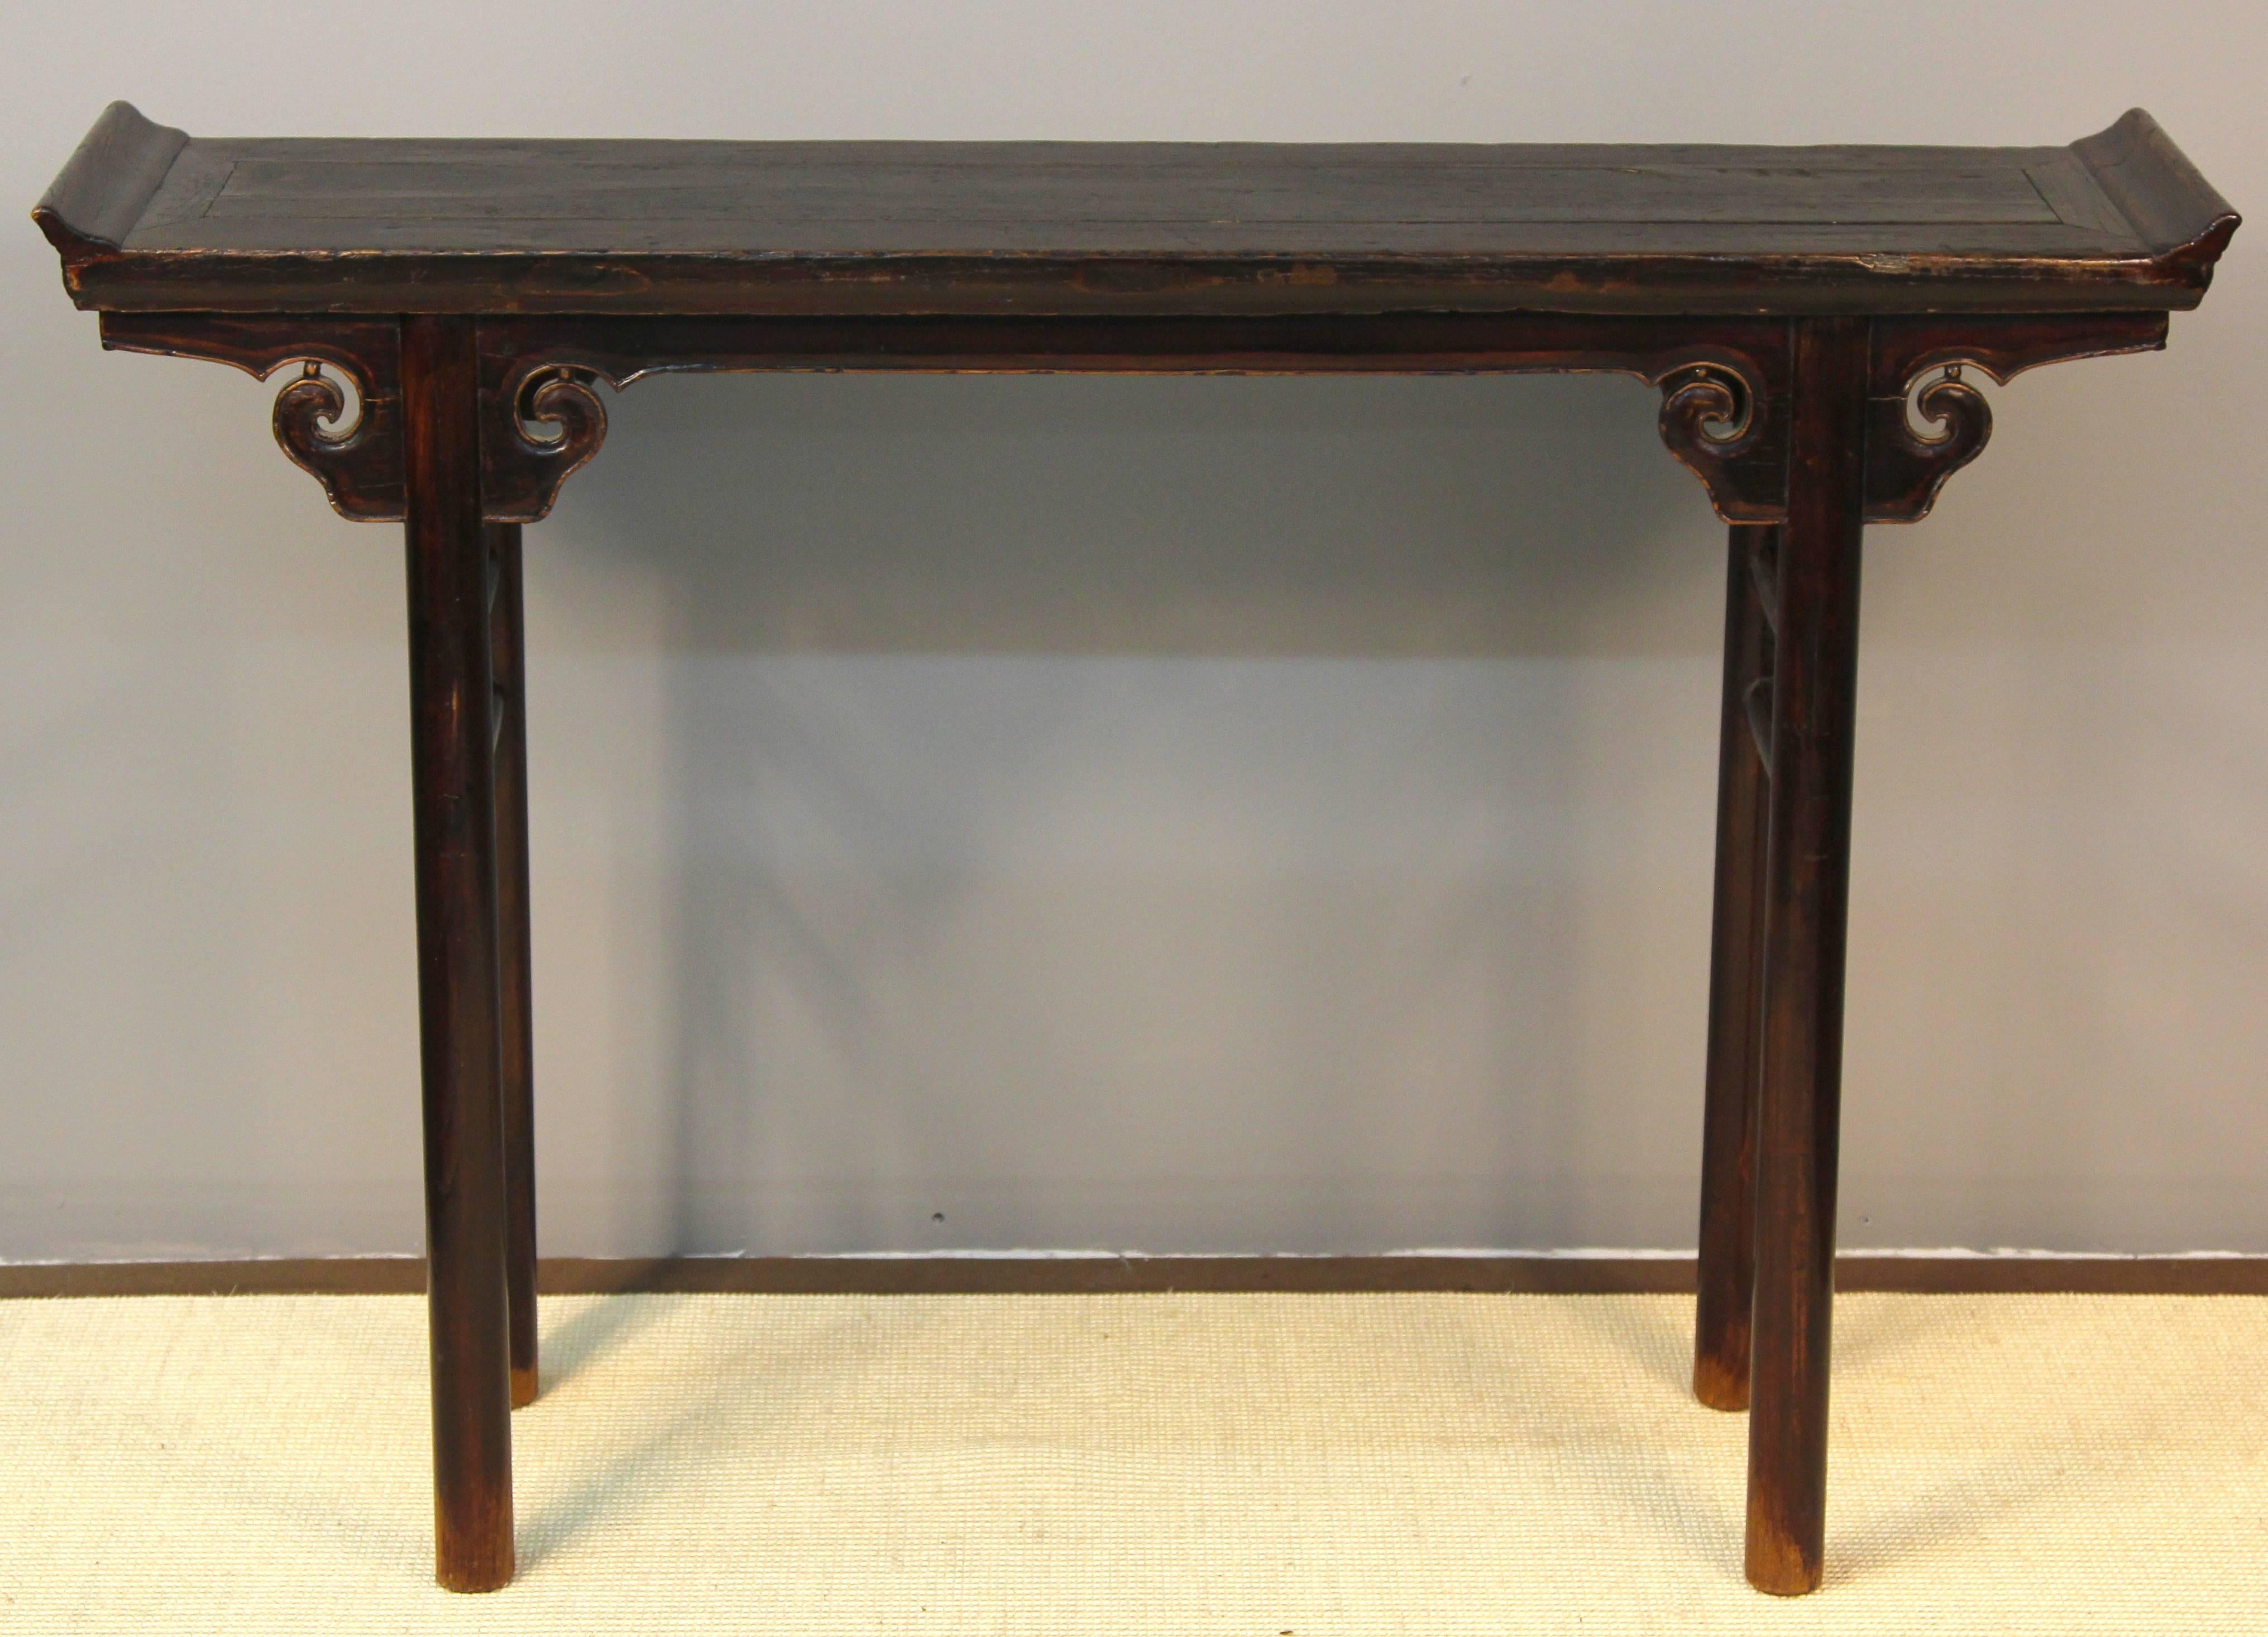 Beautifully proportioned antique Chinese elmwood altar table with double eat spandrels and mortise and tenon joinery, in original surface. Shanxi Province. A fine example in a versatile size, which would make a stylish addition to any smaller space.